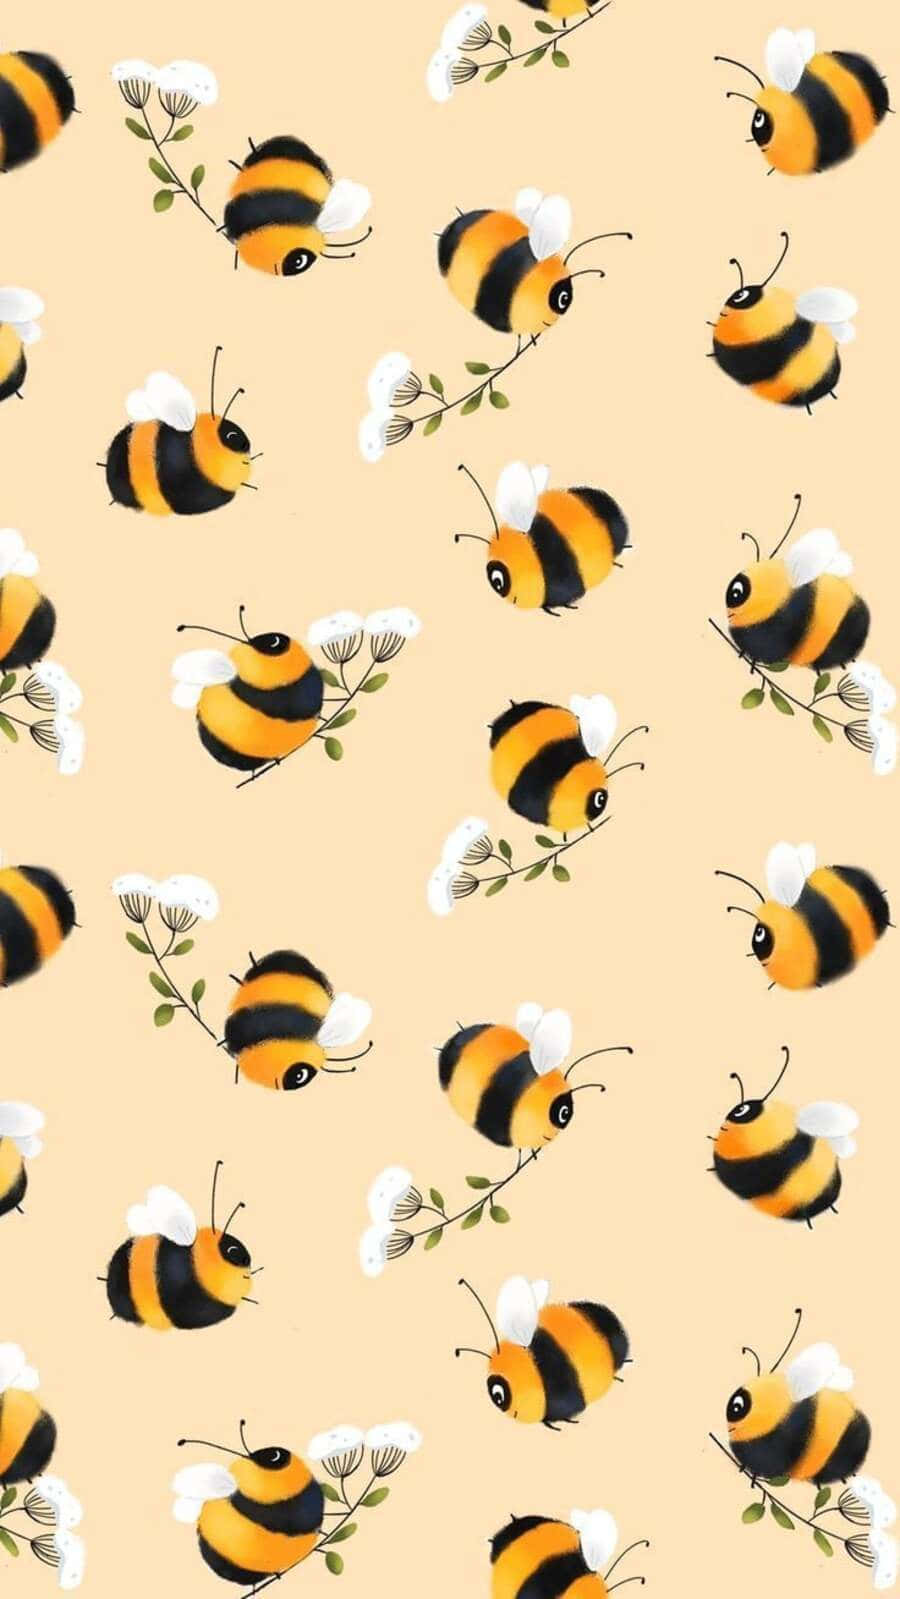 A Vibrant Aesthetic Bee on a Blooming Flower Wallpaper